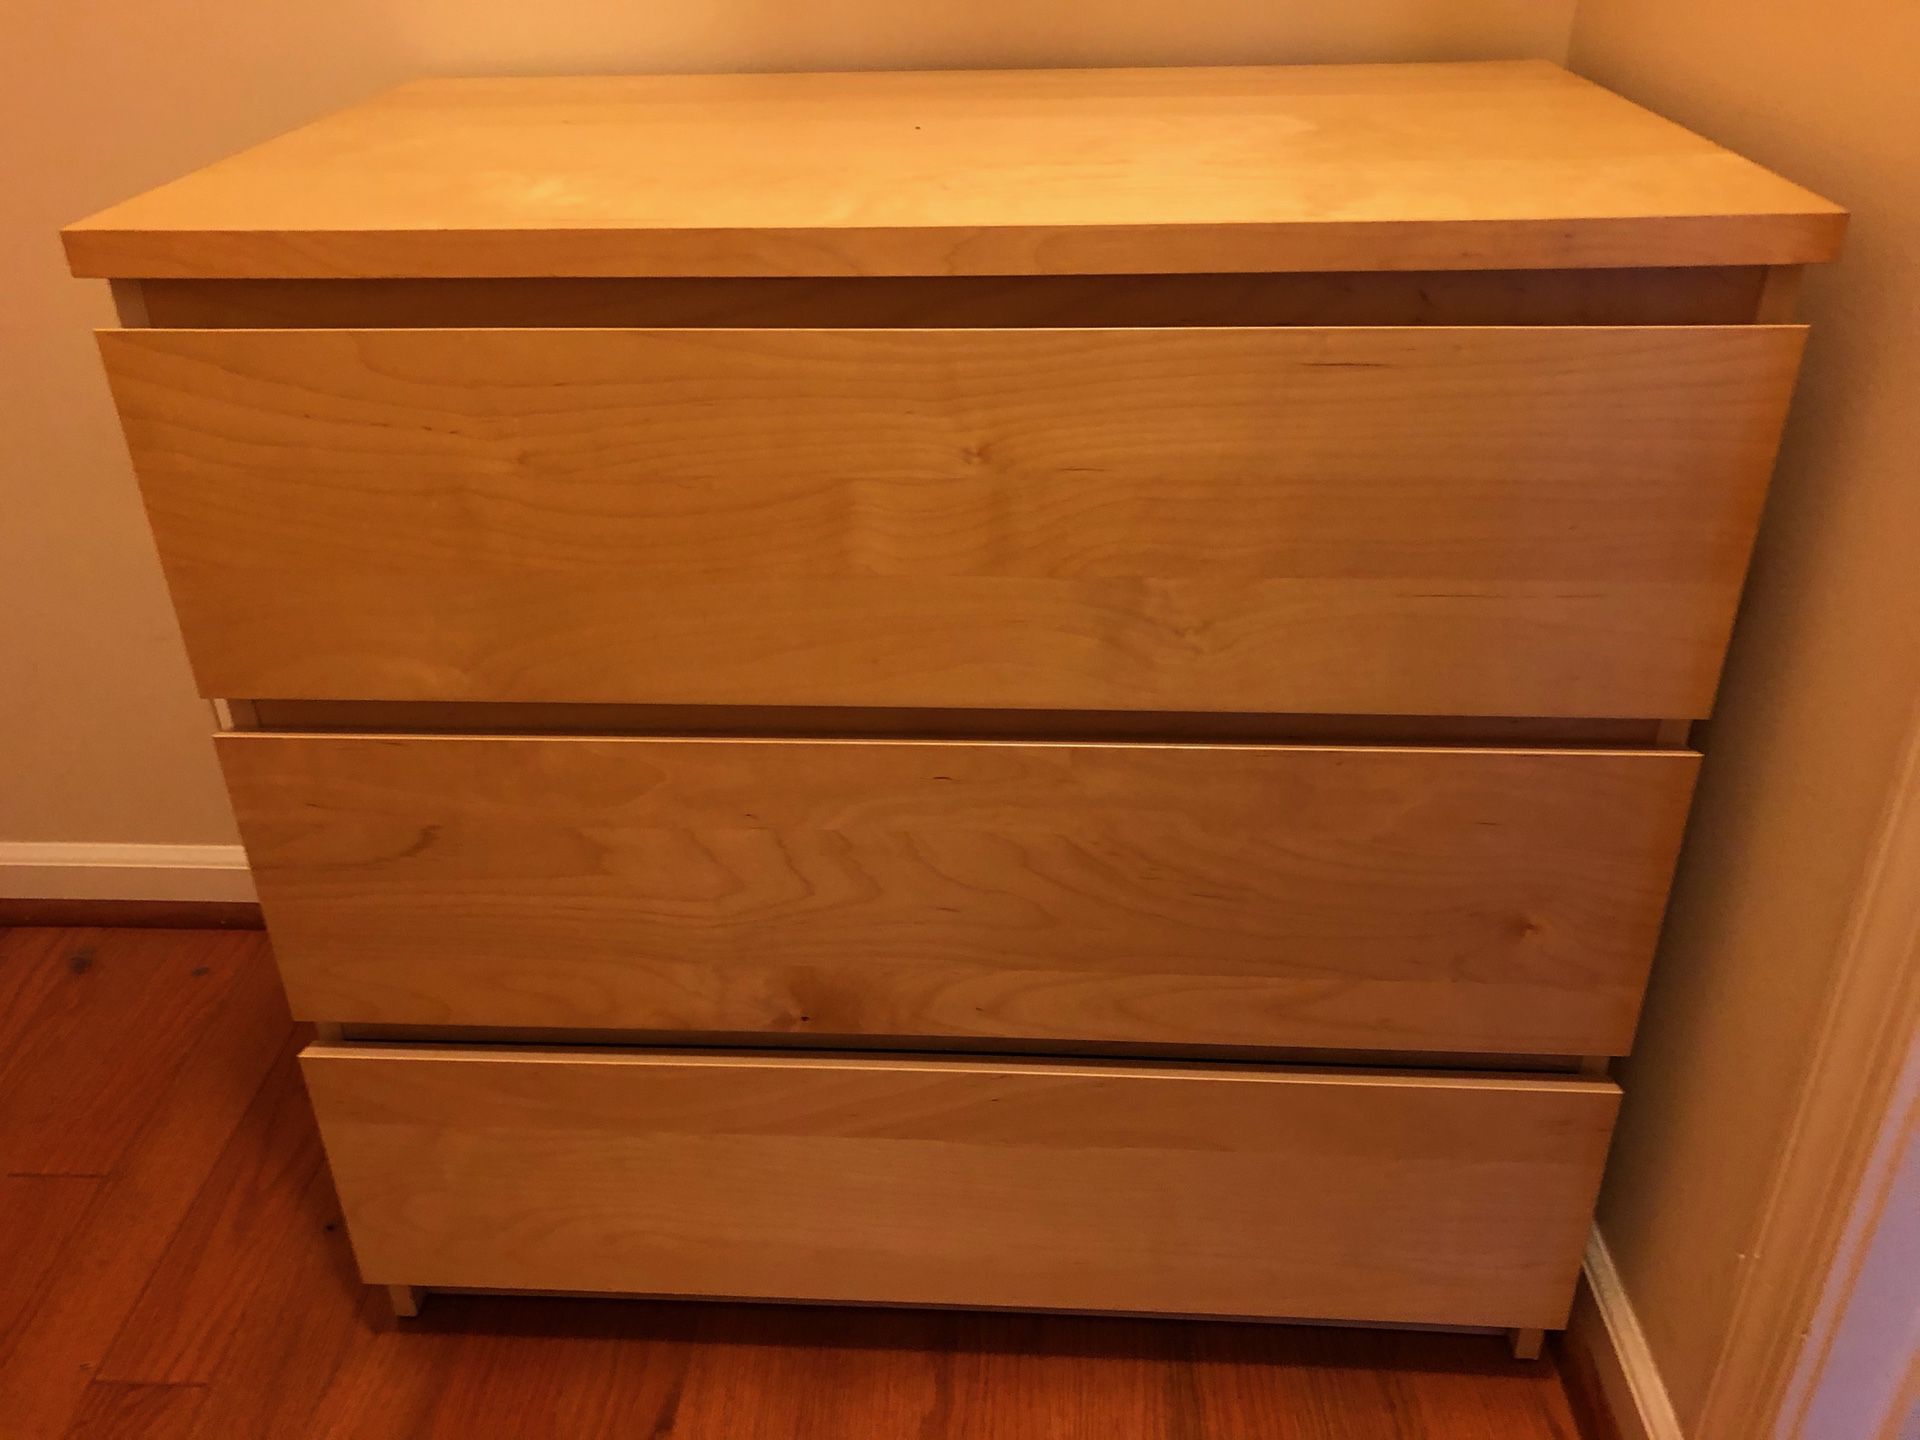 Two dressers - 3 drawers